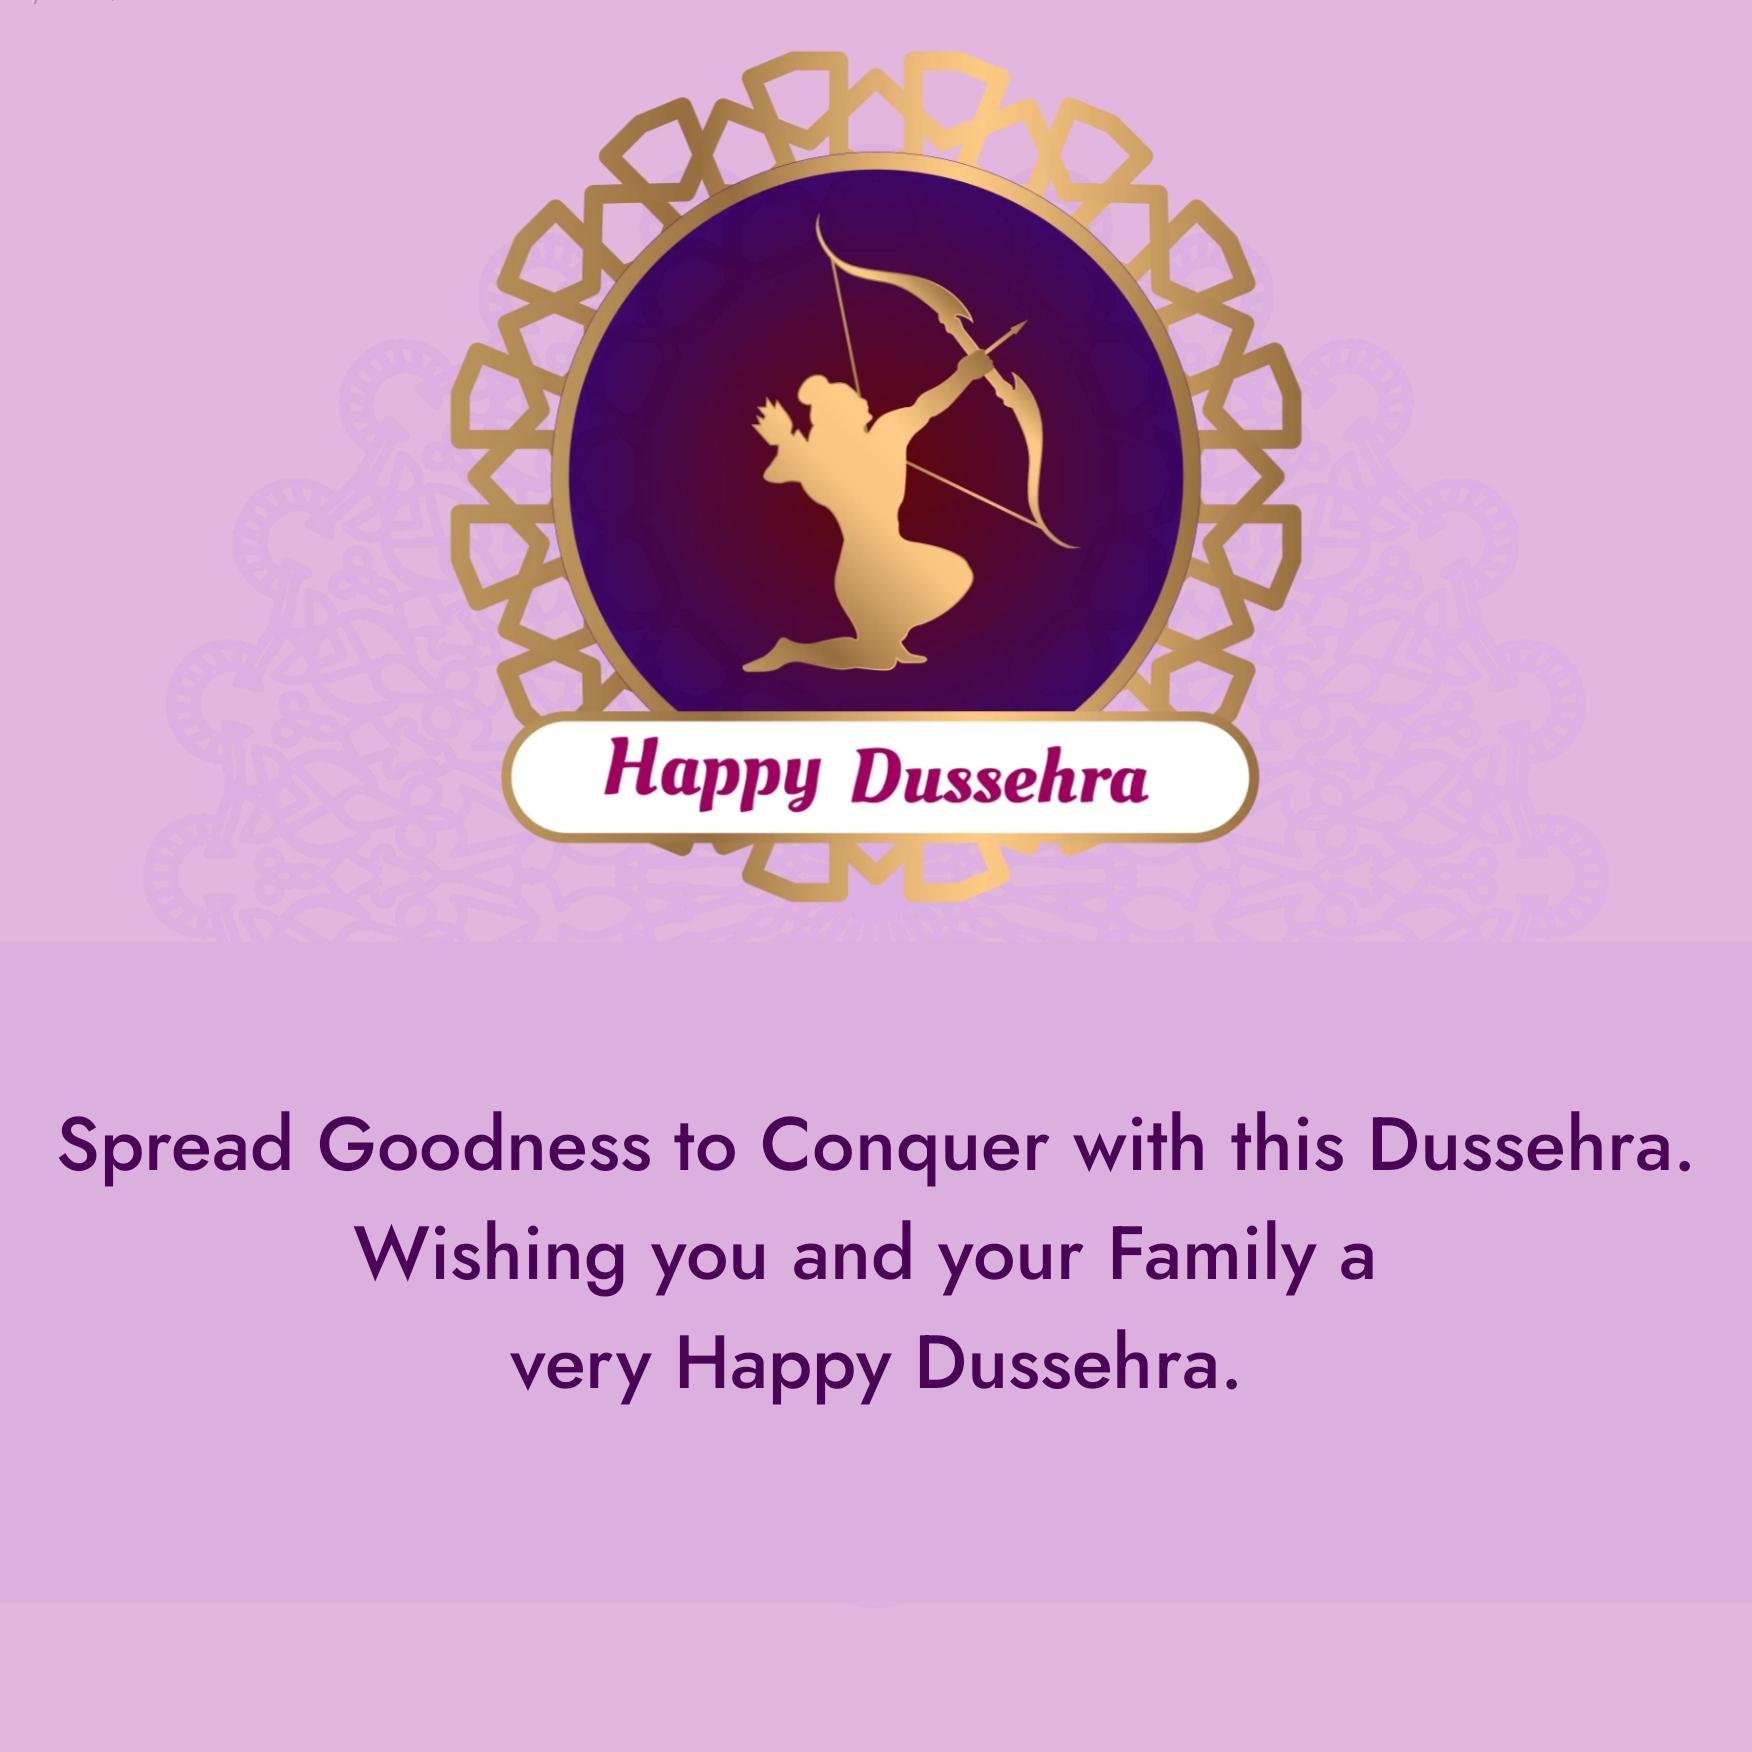 Spread Goodness to Conquer with this Dussehra